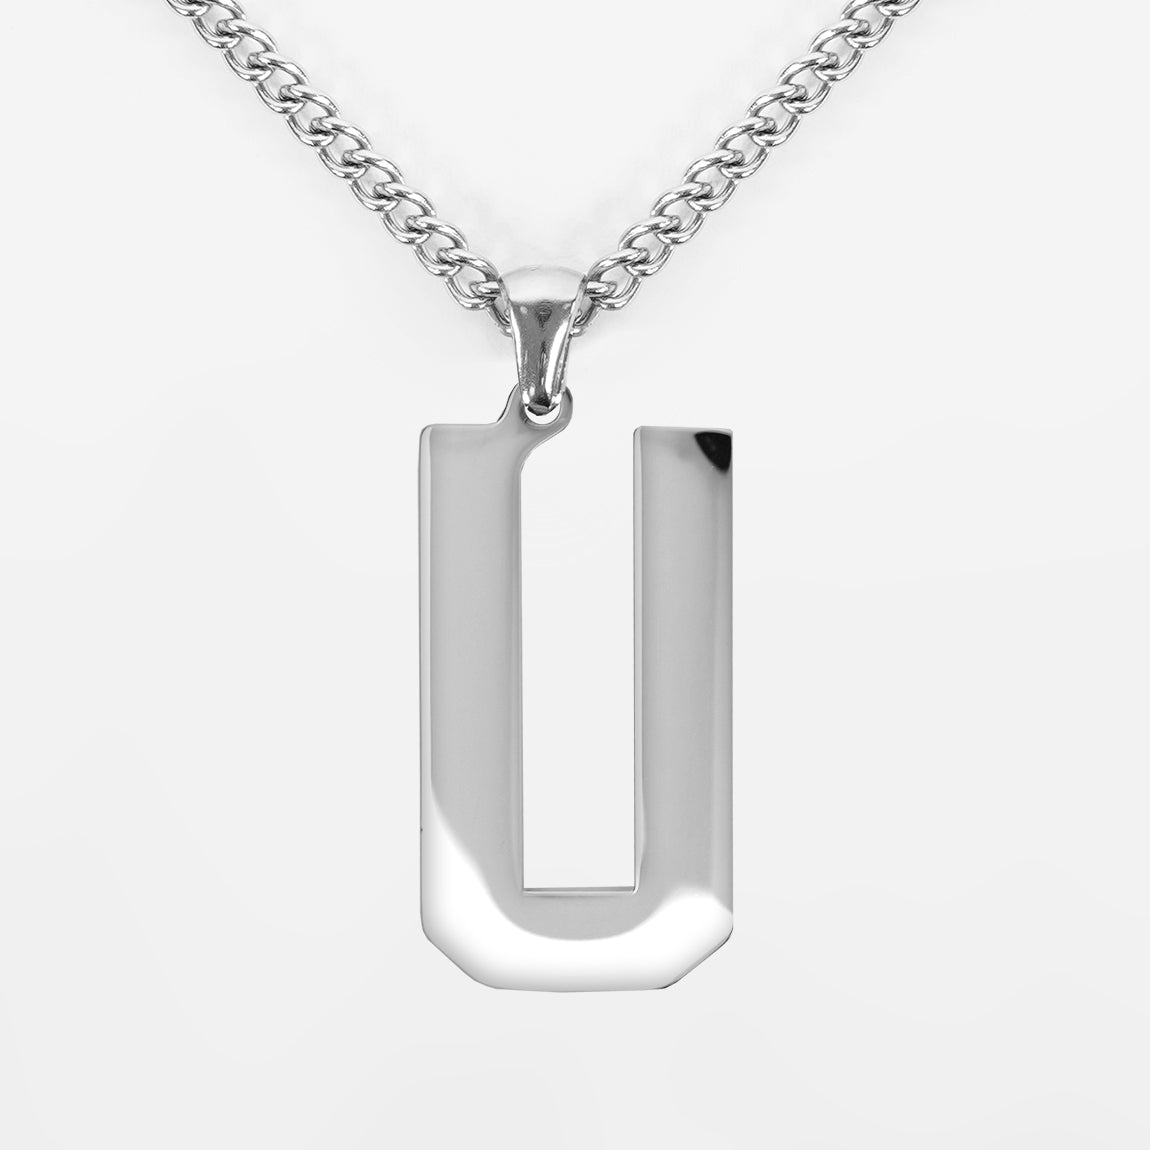 U Letter Pendant with Chain Necklace - Stainless Steel